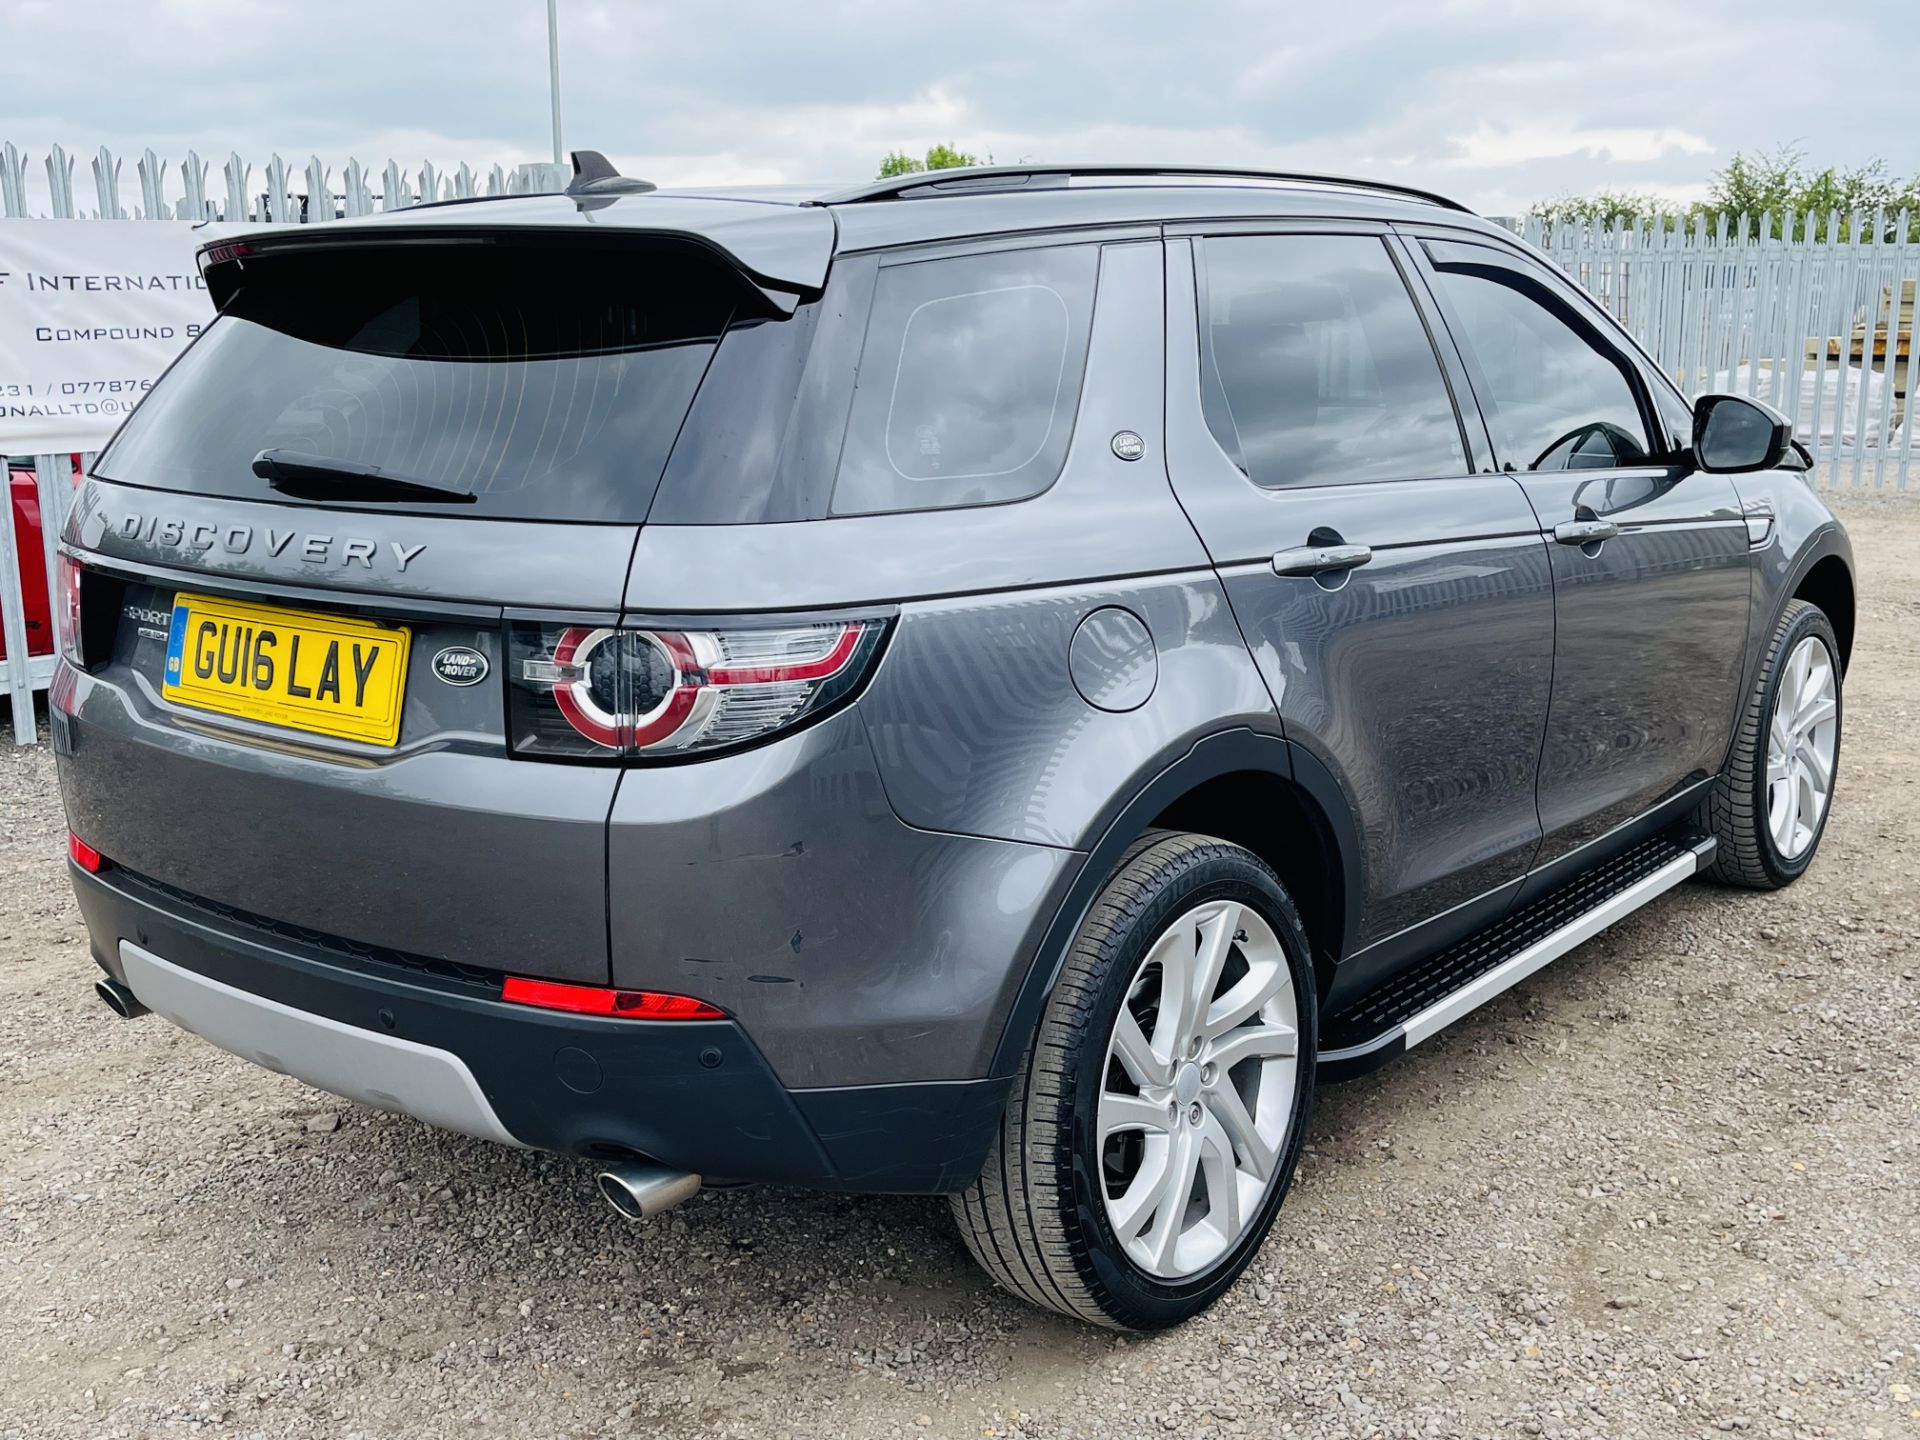 Land Rover Discovery sport 2.0 TD4 HSE - 2016 '16' Reg ' Sat Nav' A/C ' Automatic ' Euro 6b - Image 11 of 36